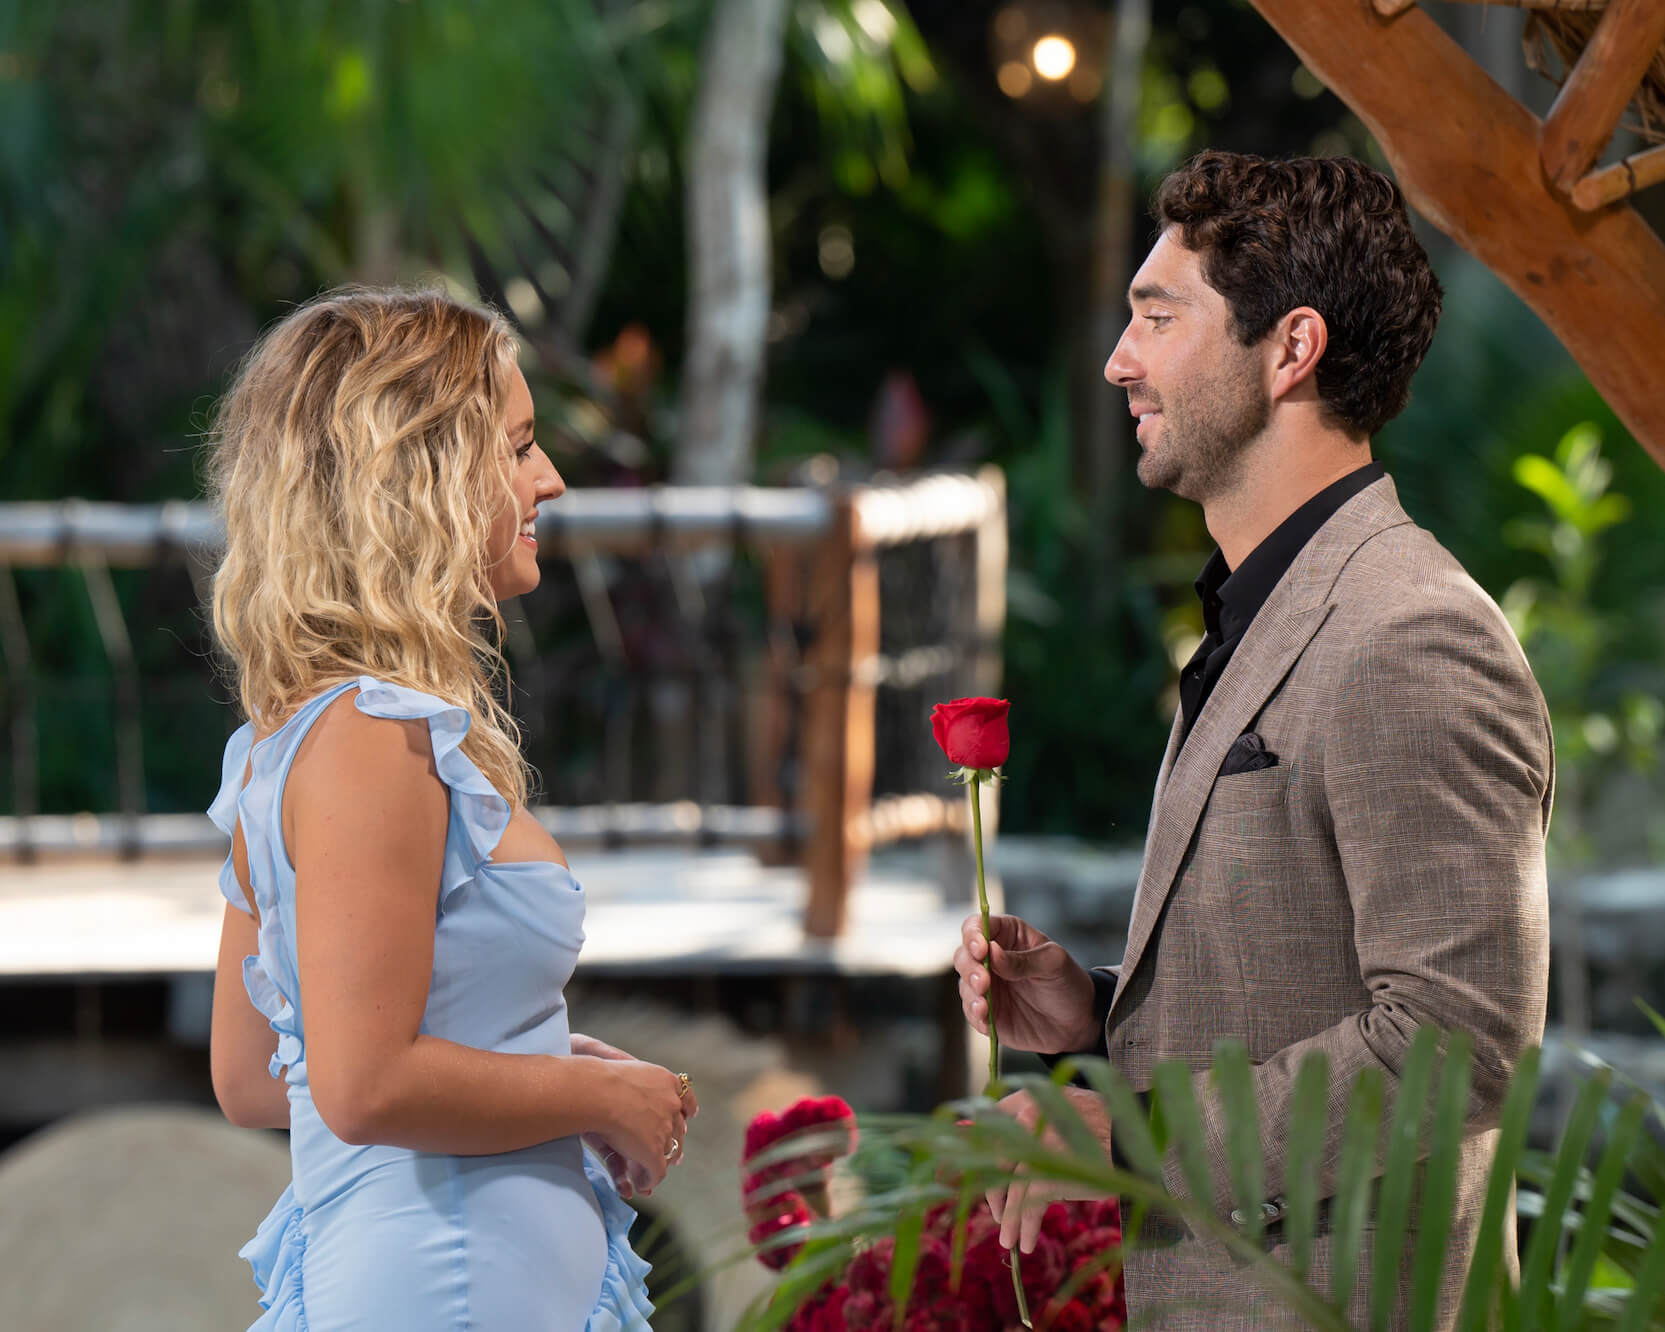 Daisy Kent looking at Joey Graziadei outdoors in 'The Bachelor' Season 28. Joey is about to hand Daisy a rose.